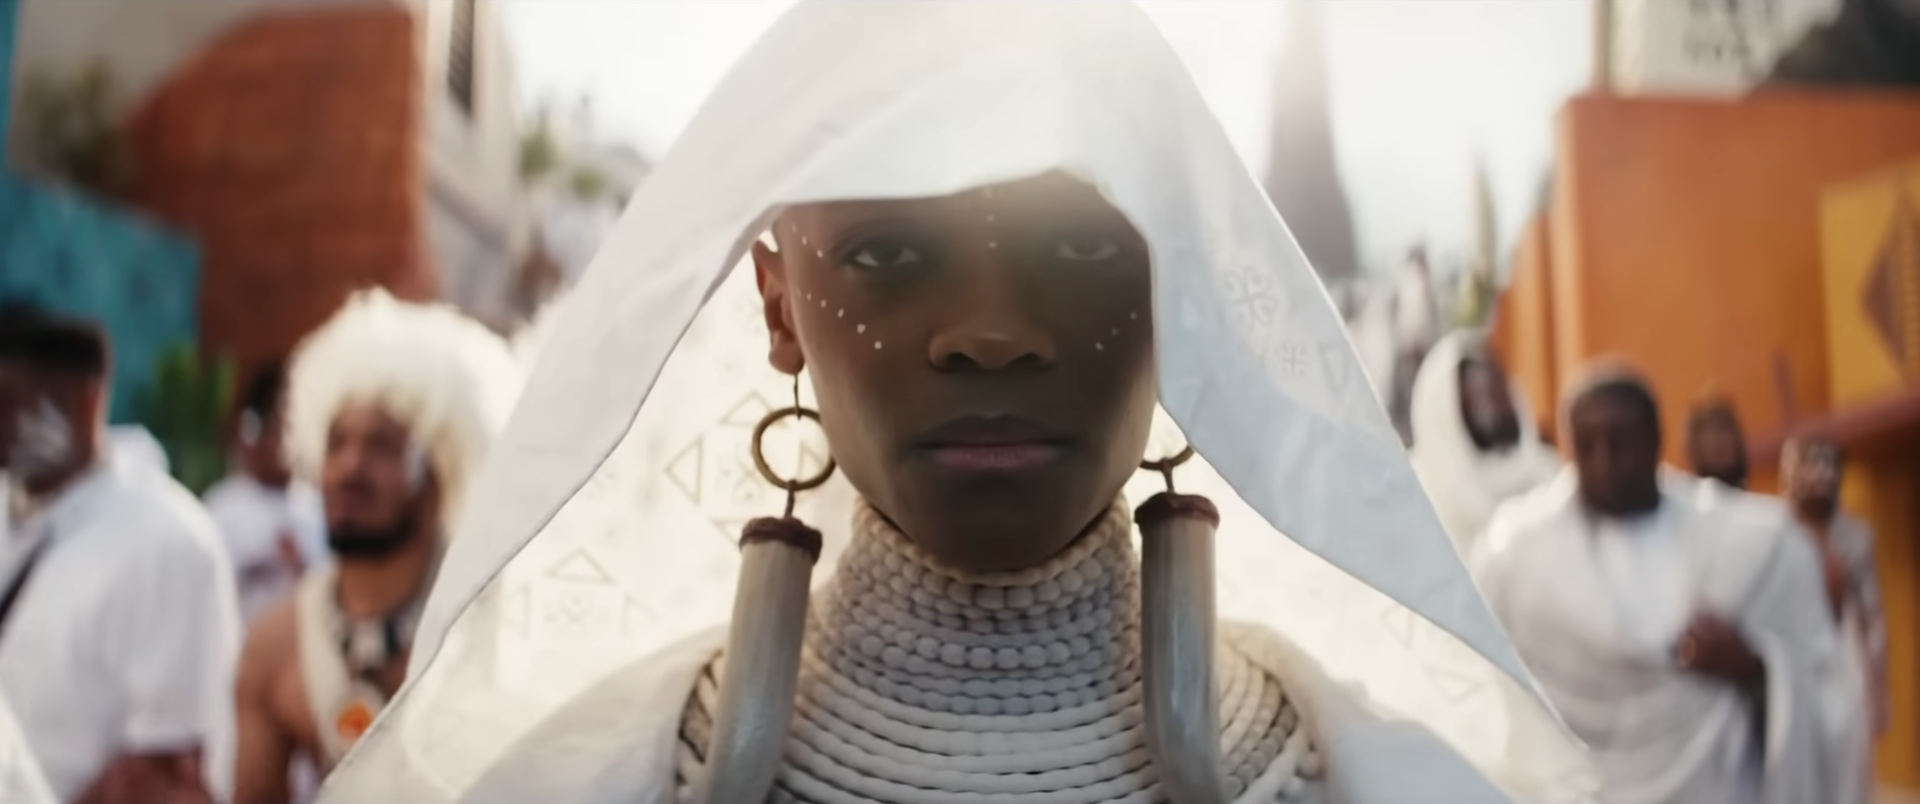 Shuri wearing all white as she walks as part of a procession